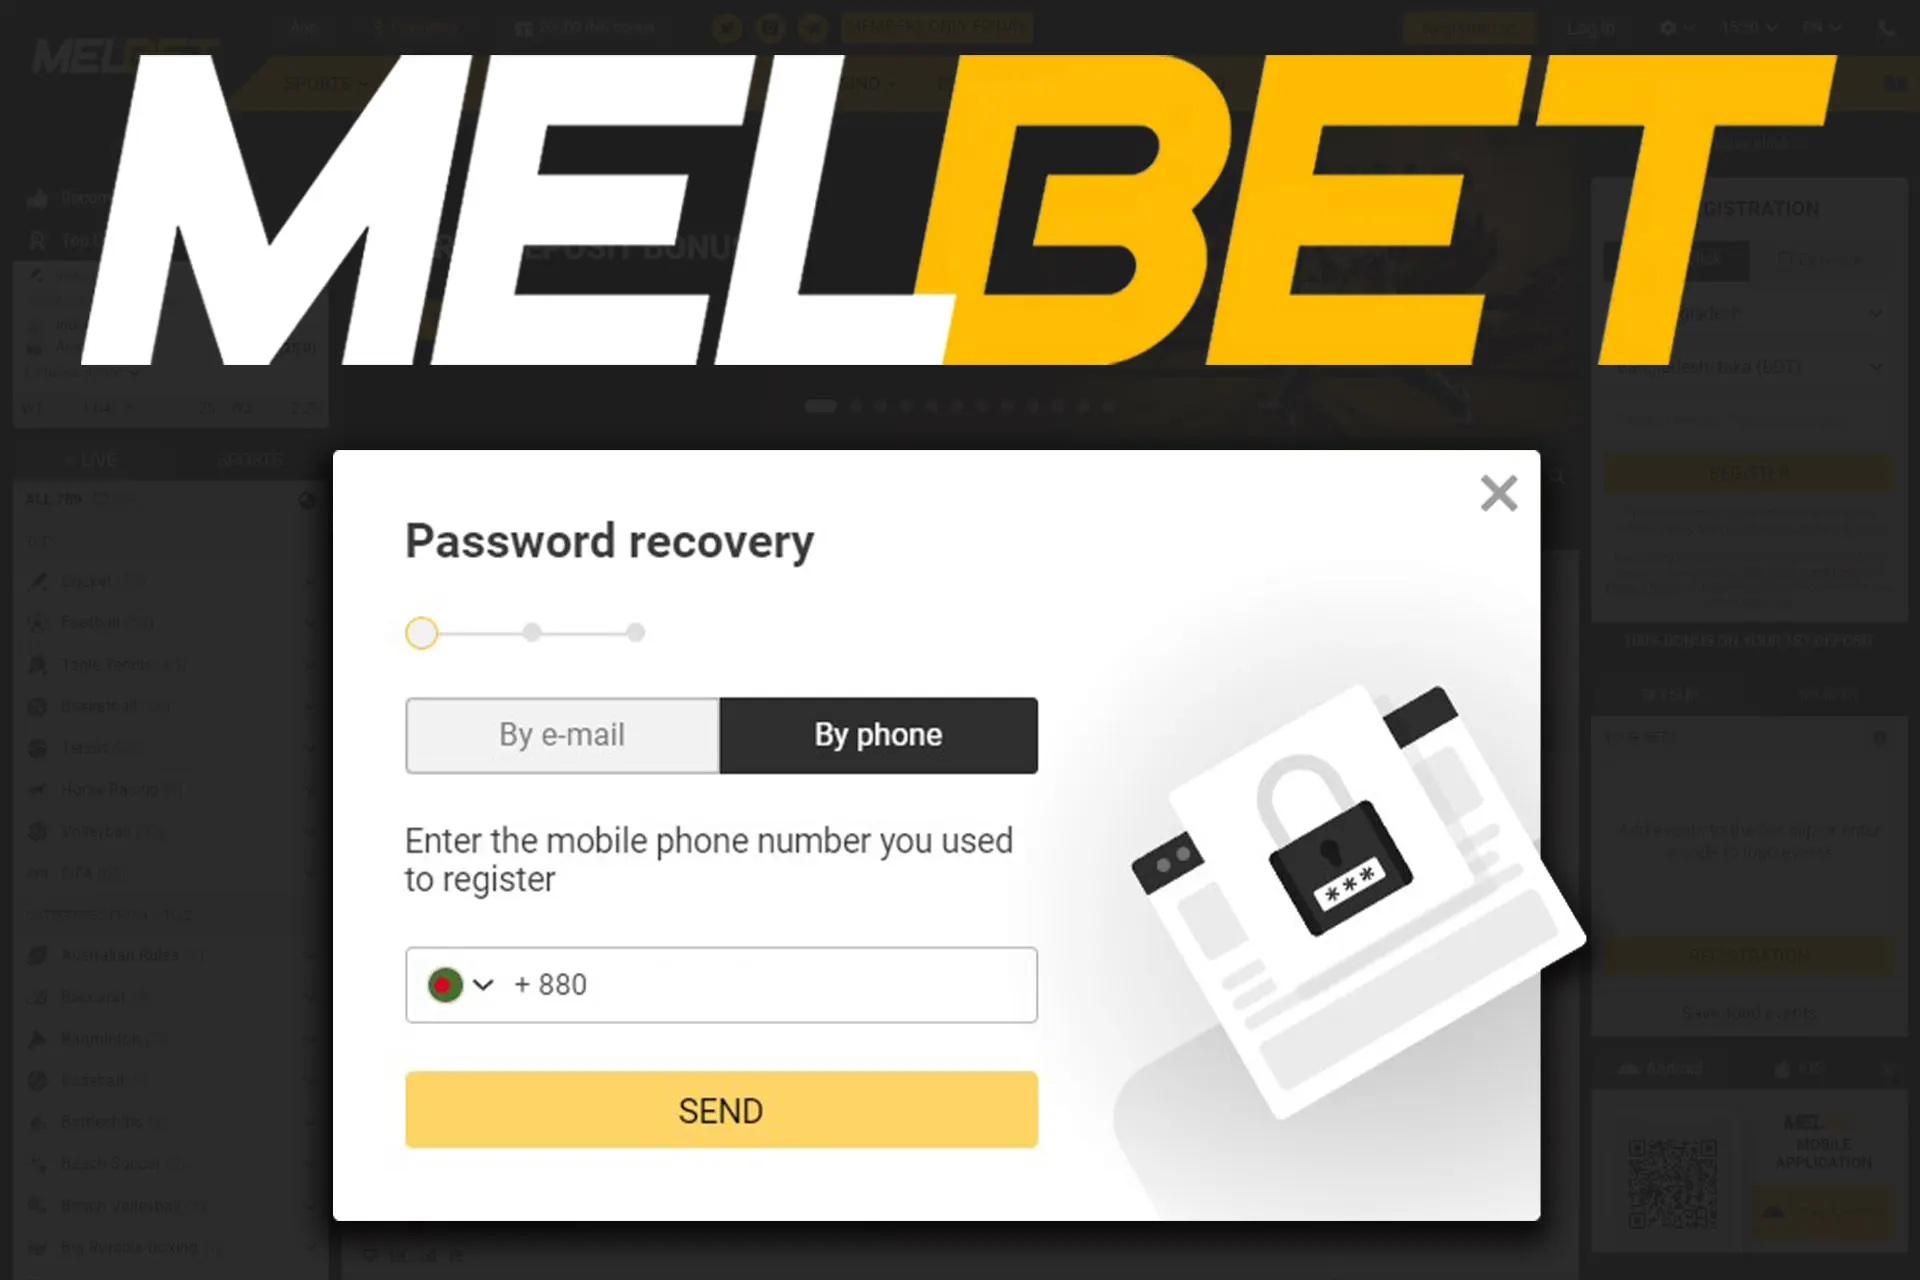 Recover your Melbet account by the phone number linked to the profile.